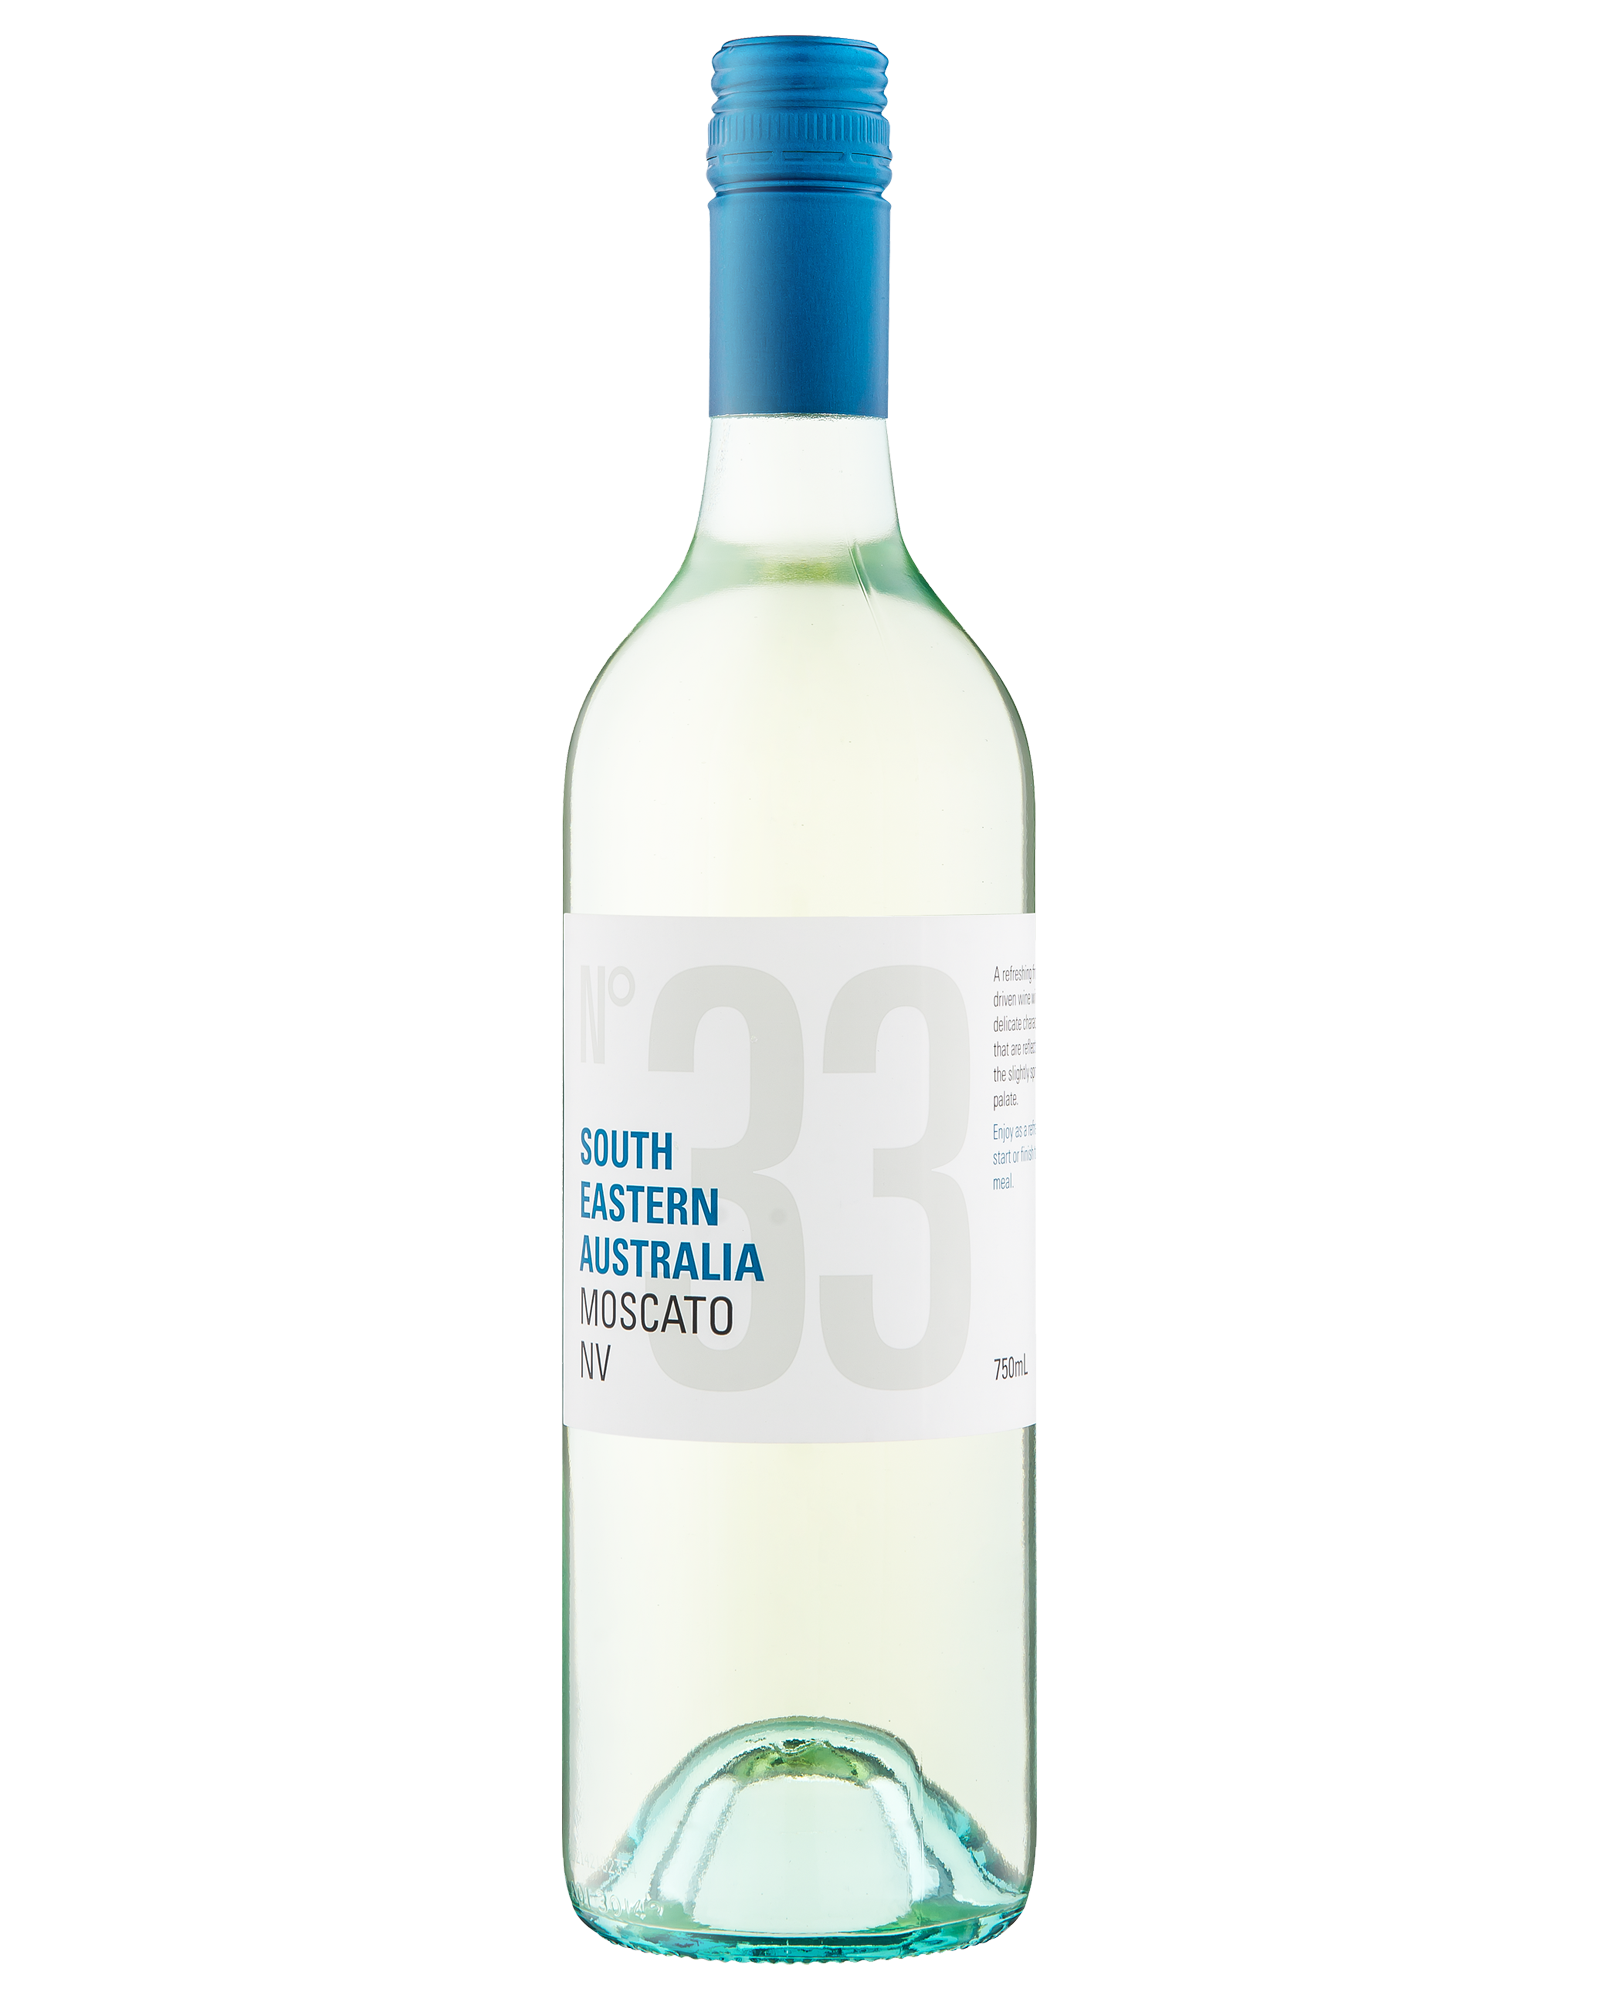 Cleanskin No 33 Moscato